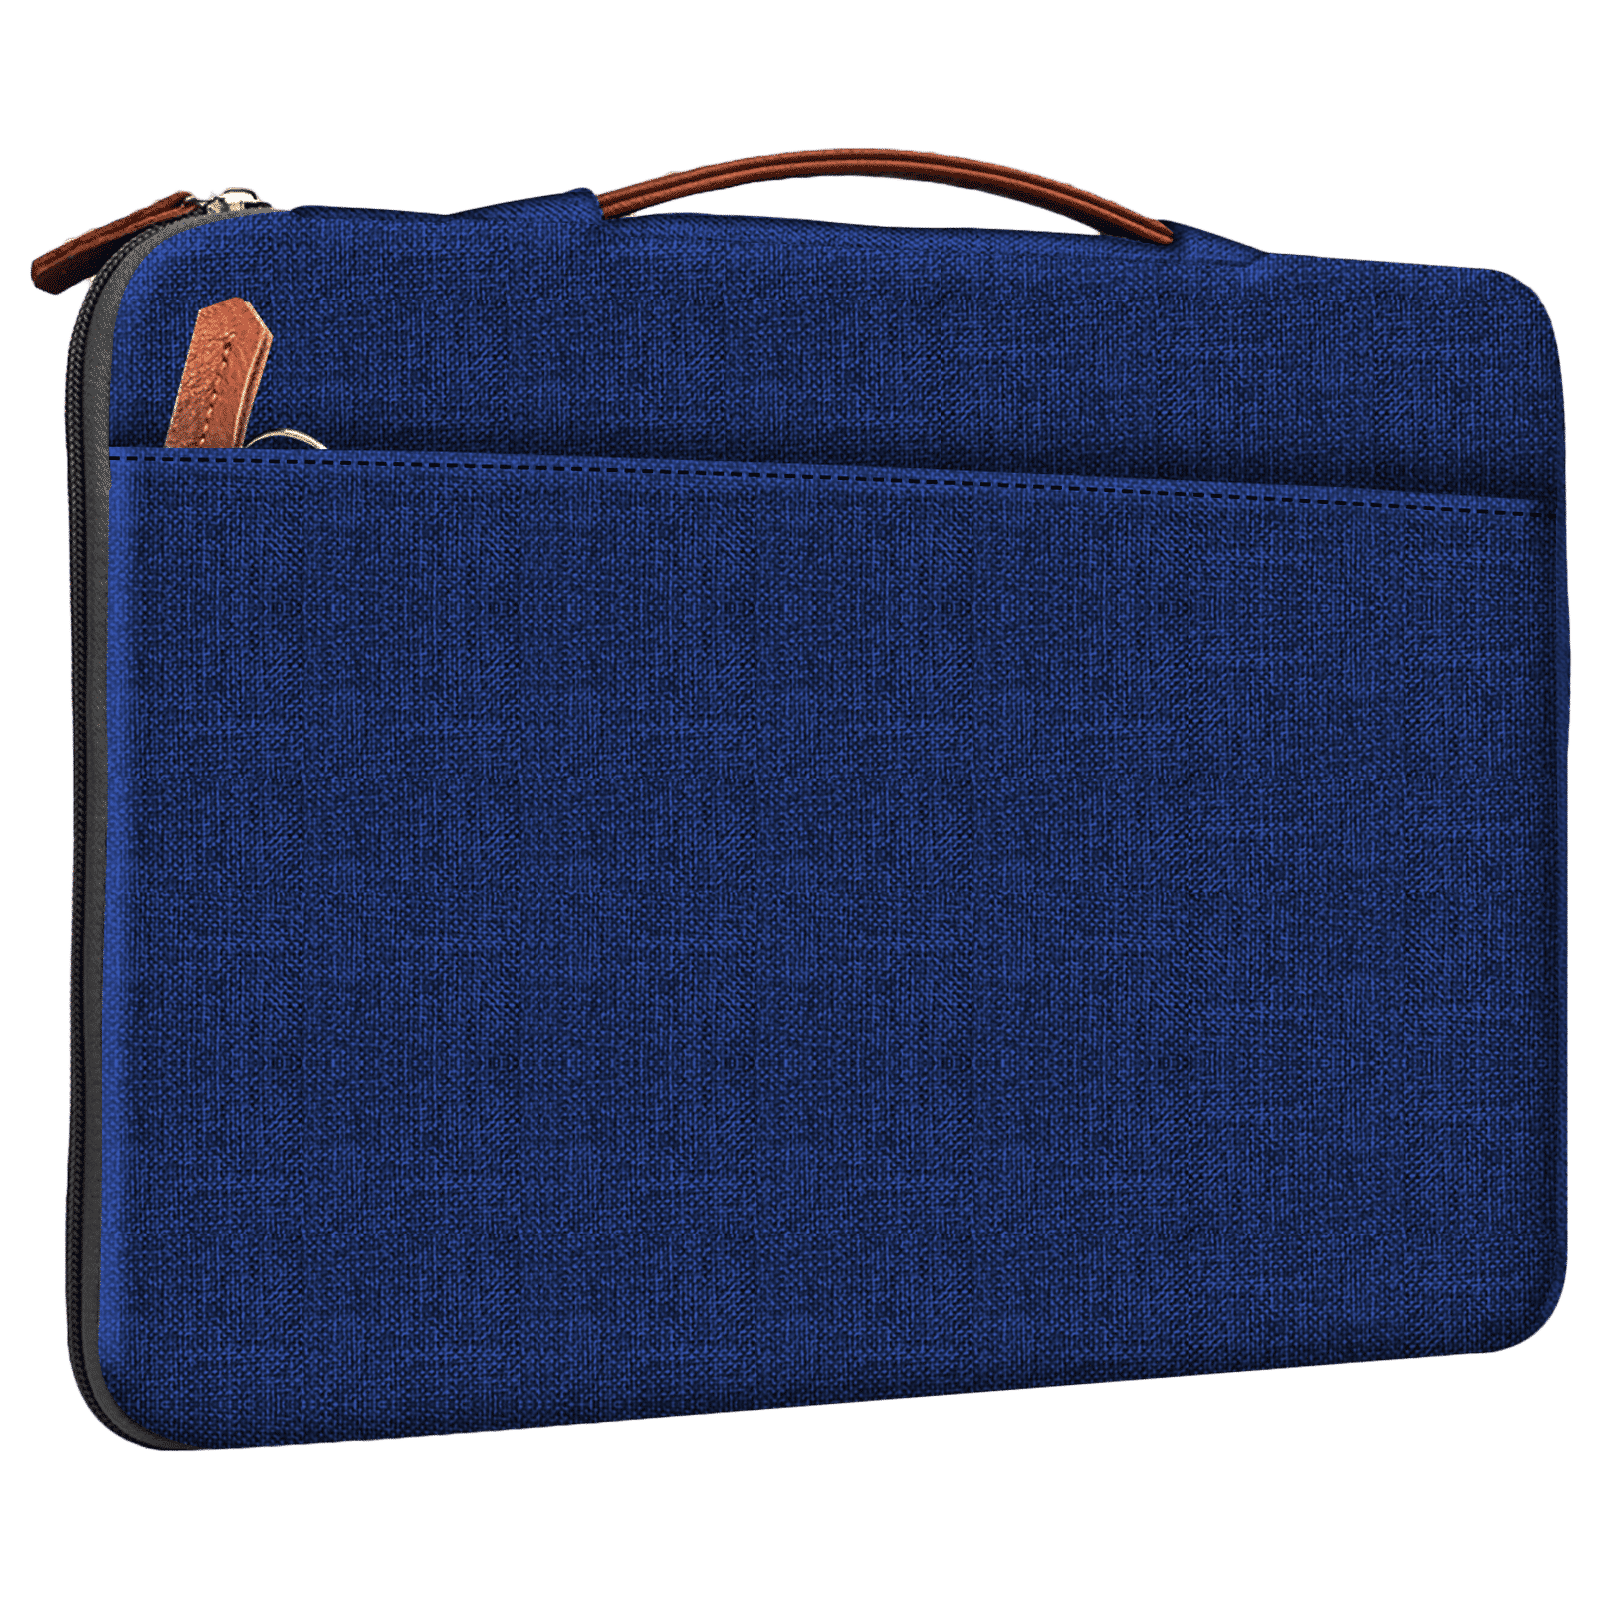 Buy GRIPP Blue Polyester Grace 13.3 Inches Laptop Bag